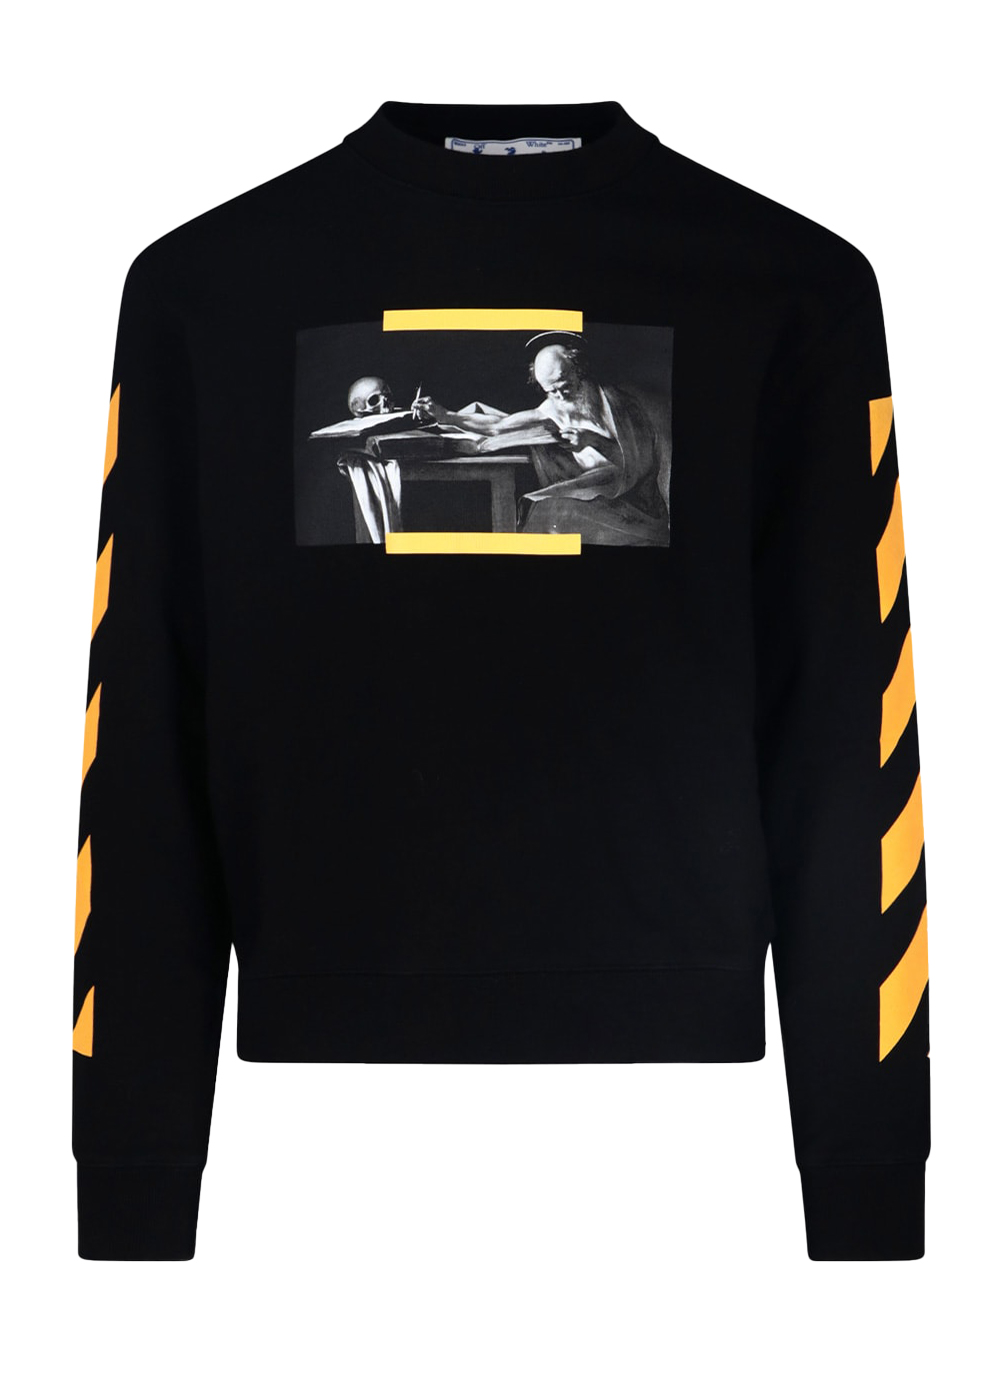 OFF-WHITE Caravaggio Saint Jerome Writing Hands Off Logo Slim Fit T-shirt While/Black/Yellow